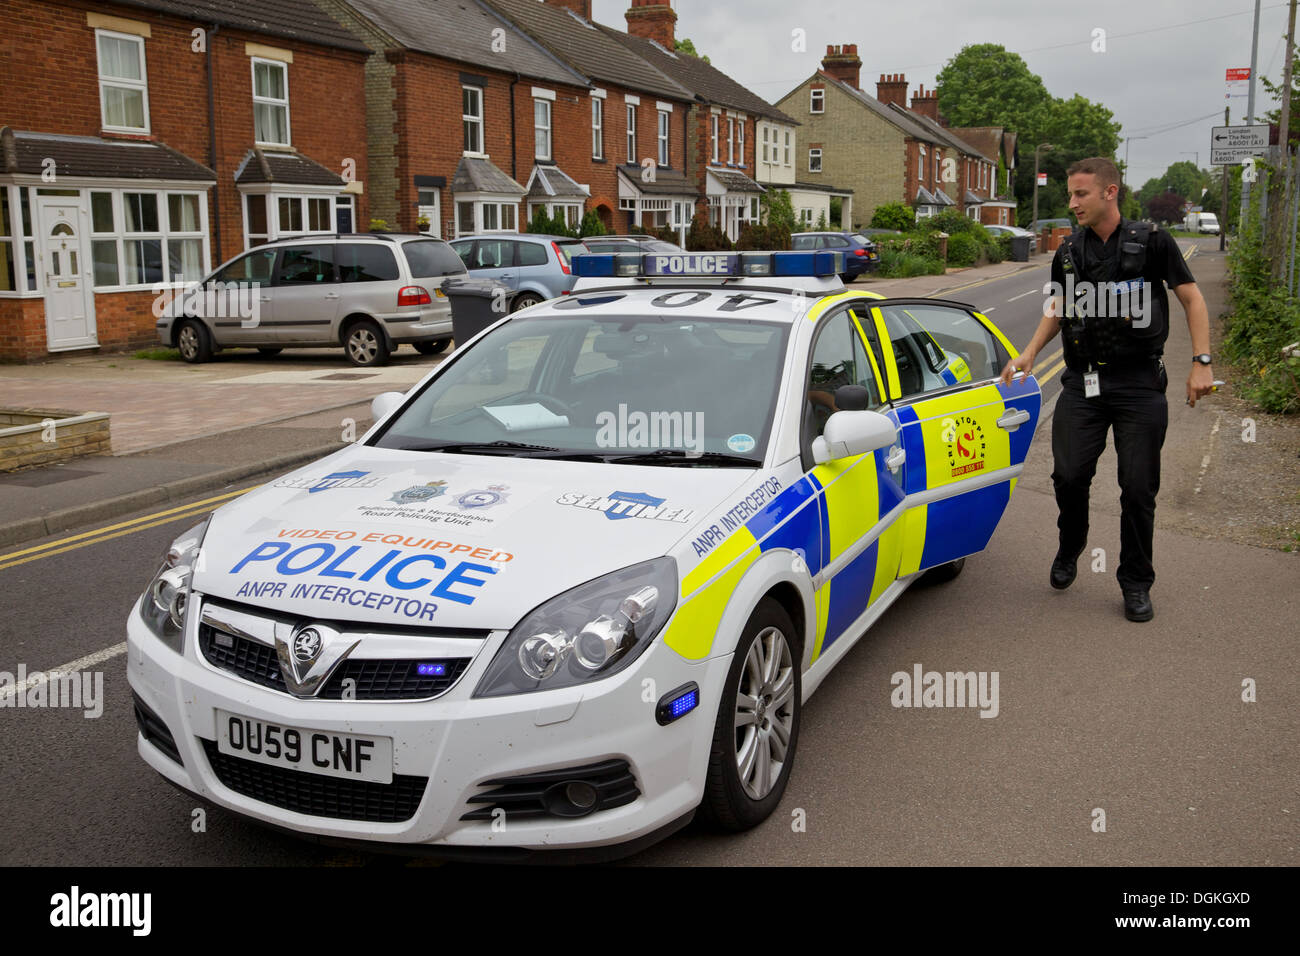 A police car with automatic number plate recognition equipment (ANPR), England Stock Photo